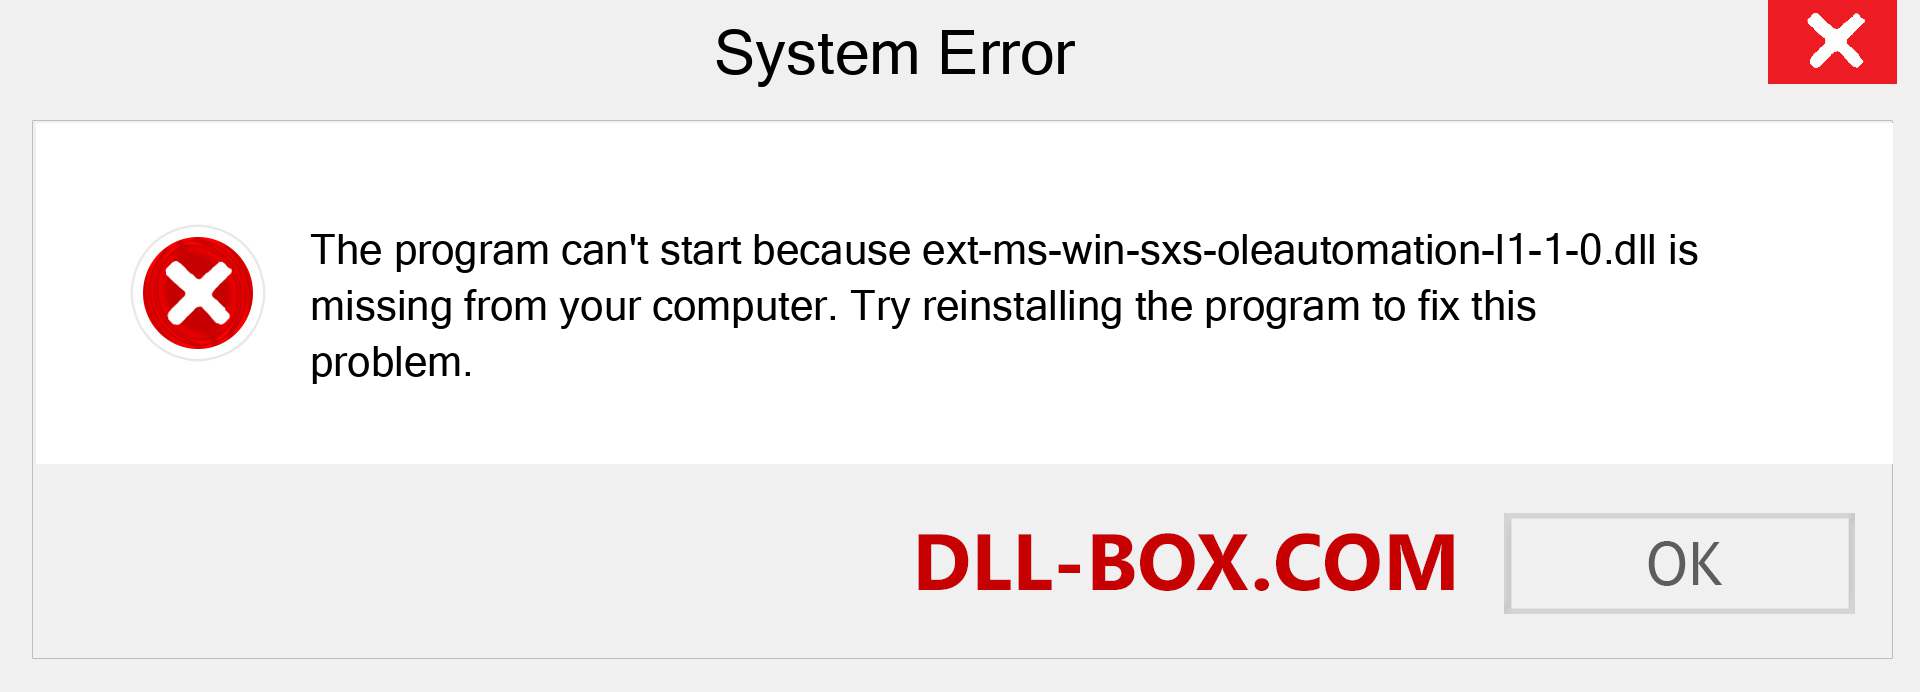  ext-ms-win-sxs-oleautomation-l1-1-0.dll file is missing?. Download for Windows 7, 8, 10 - Fix  ext-ms-win-sxs-oleautomation-l1-1-0 dll Missing Error on Windows, photos, images